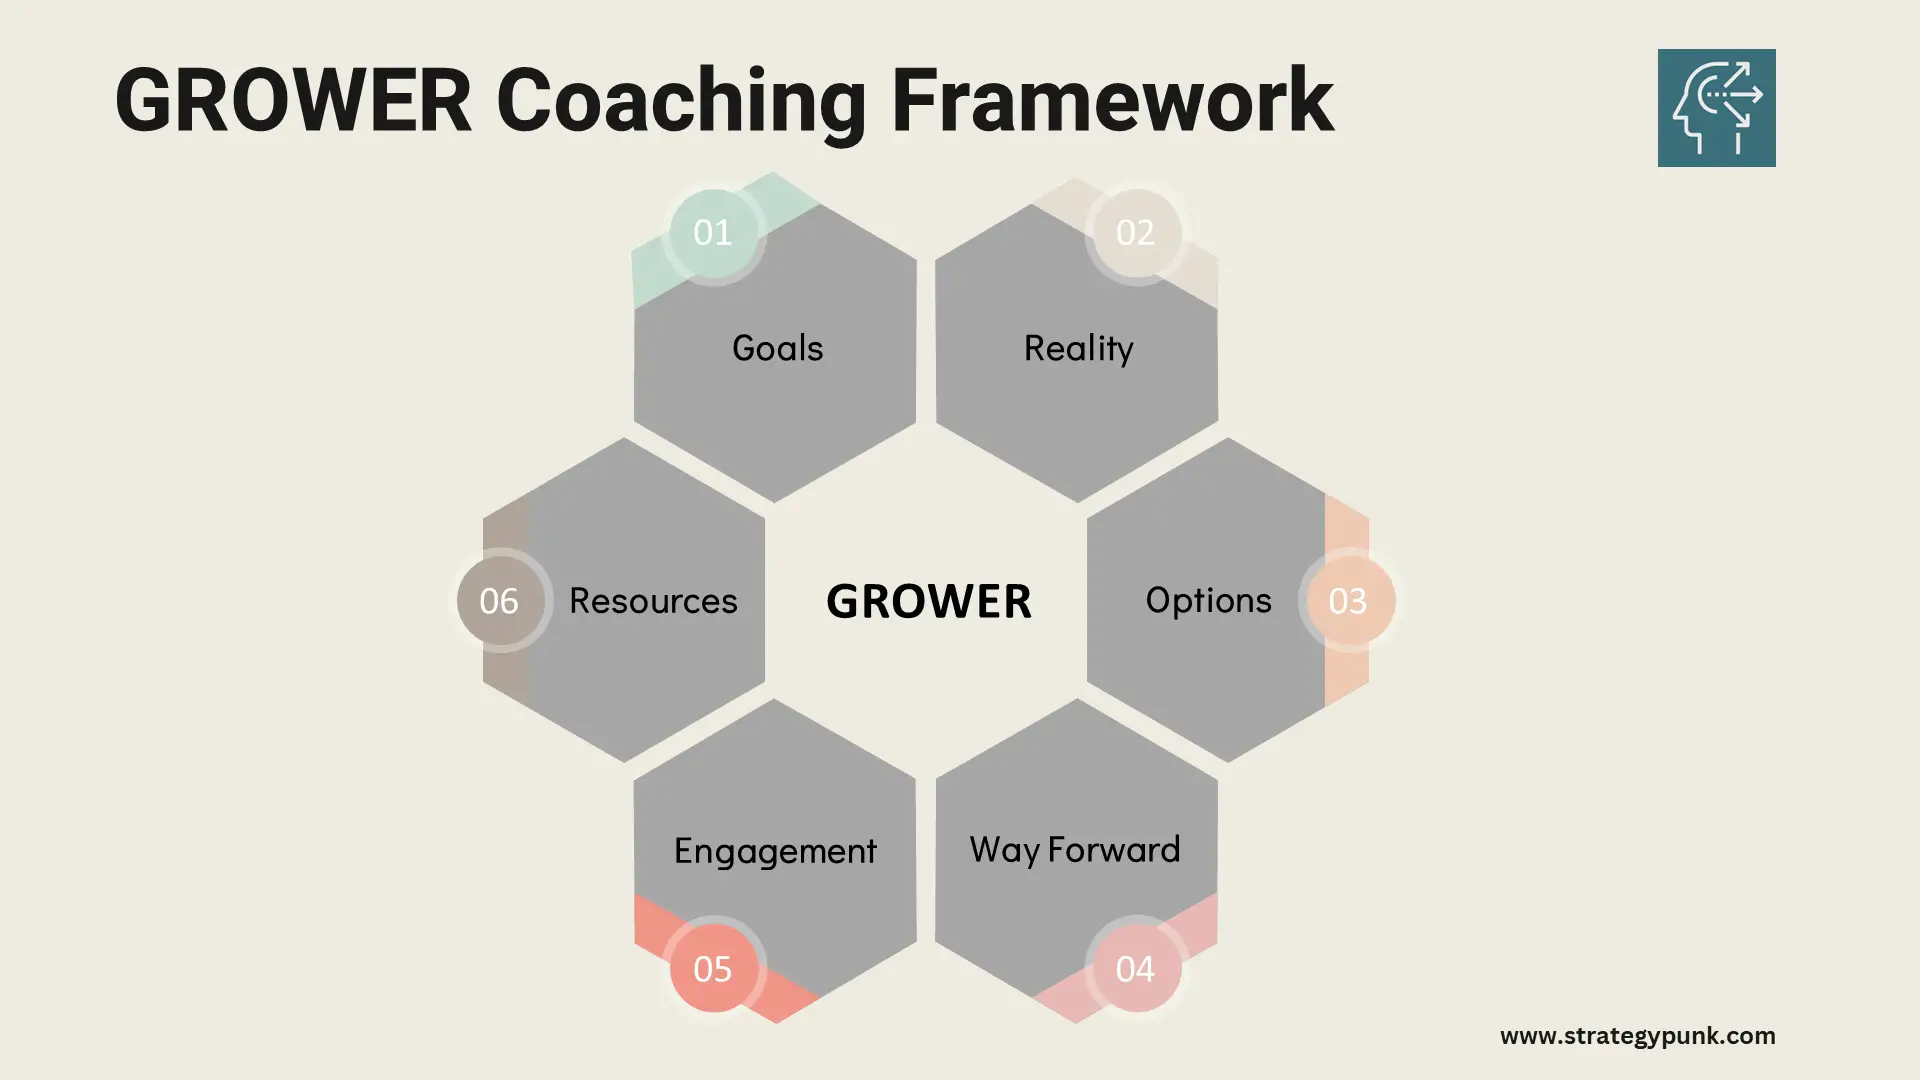 Using the GROWER Framework for Effective Coaching